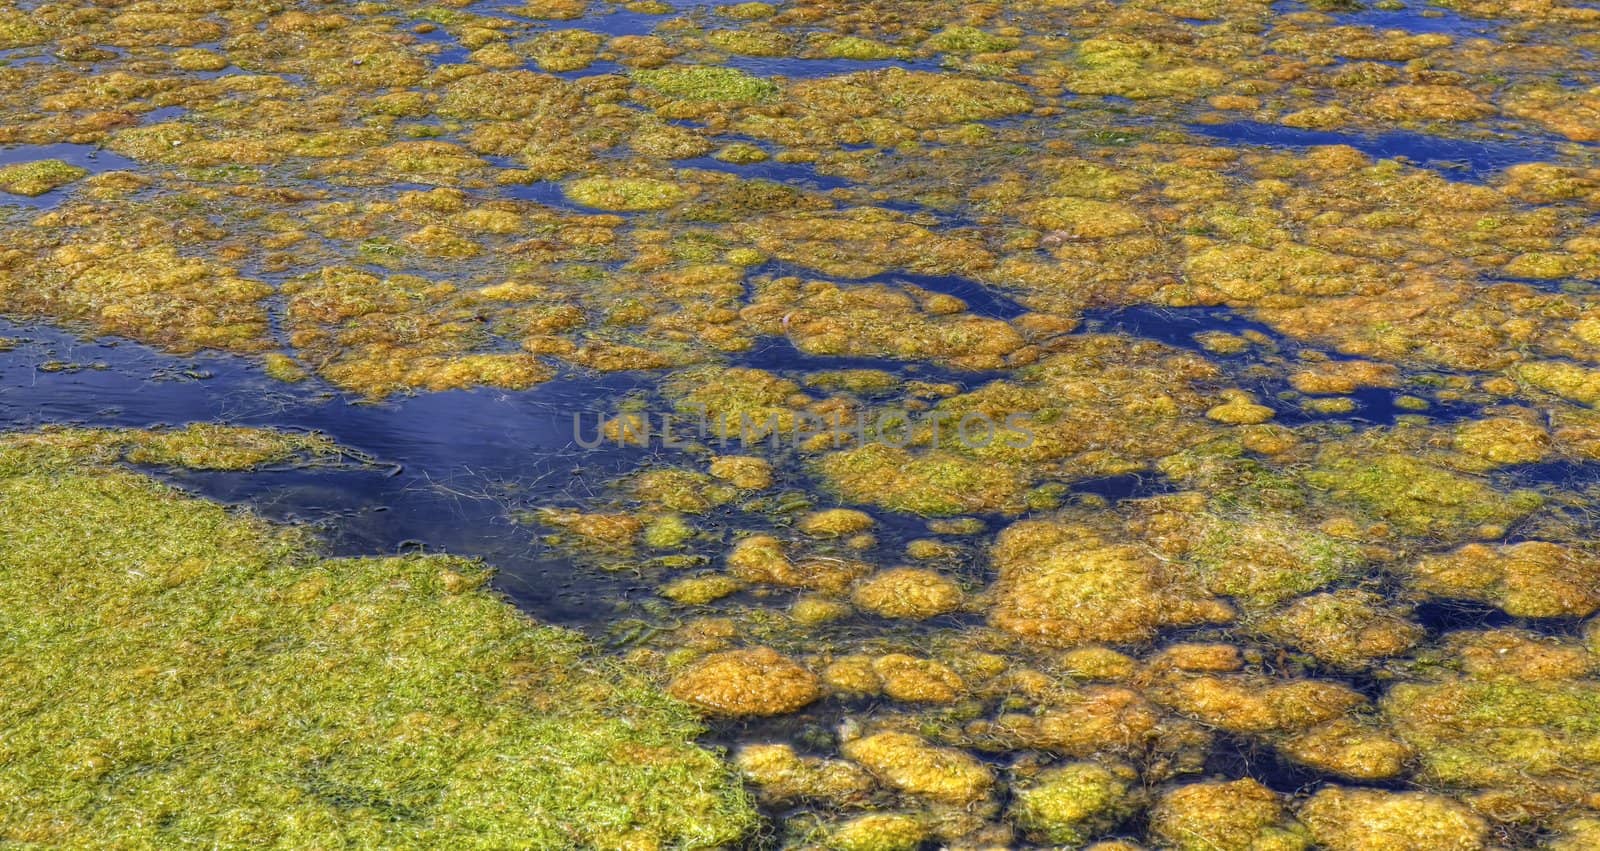 Algaes in a pond at the southern Norwegian coast